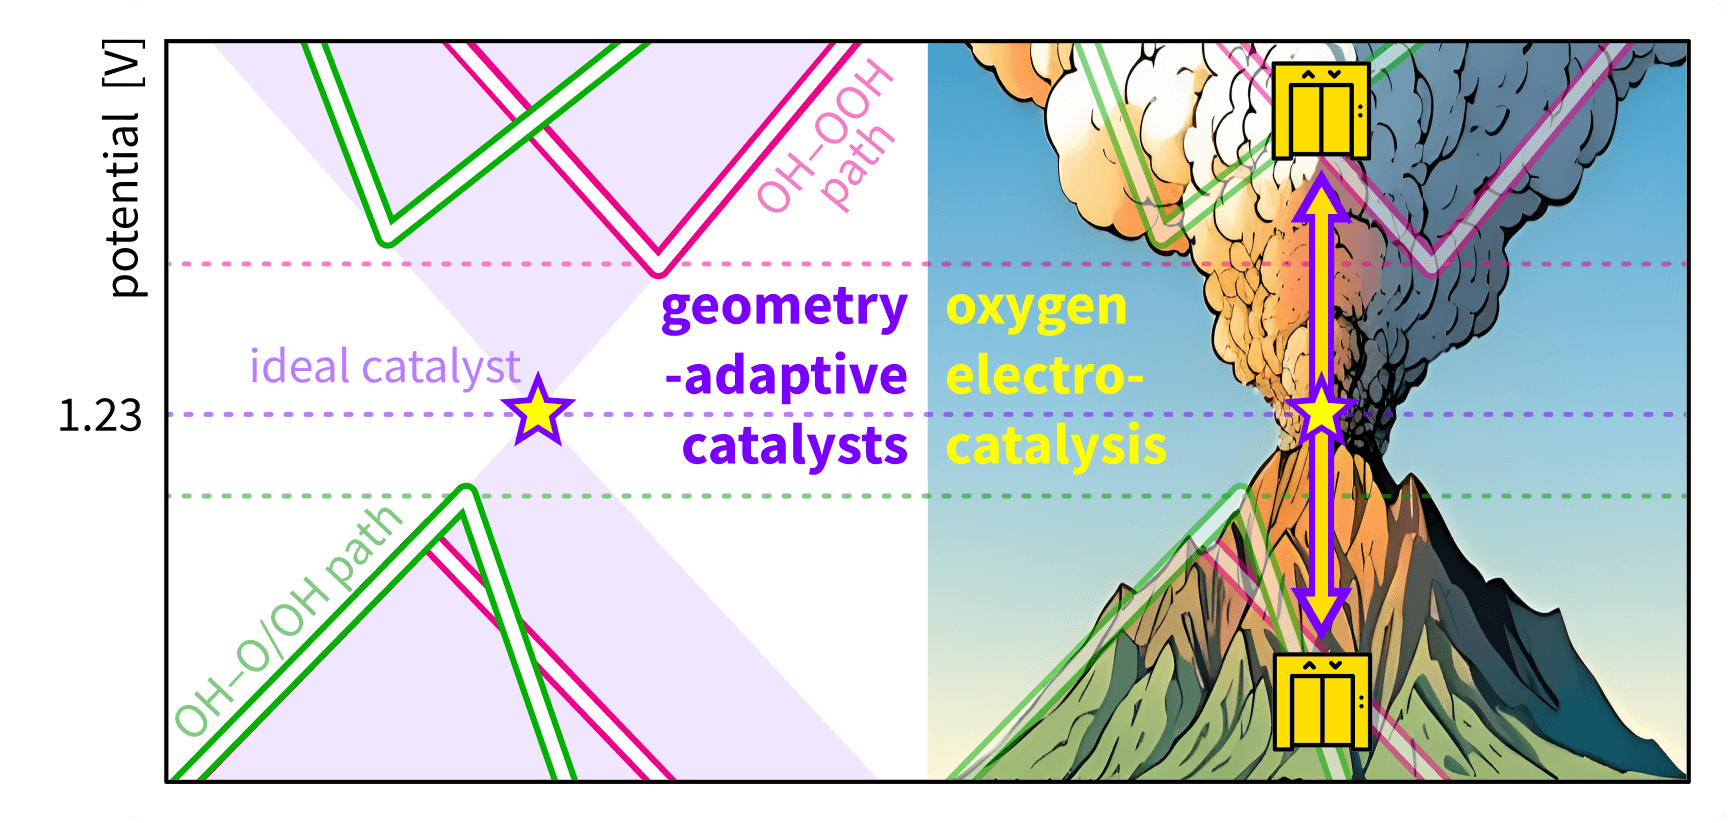 Geometry-adaptation during oxygen electrocatalysis makes catalysts behave as ideal and elevates them to the apex of the activity volcano.